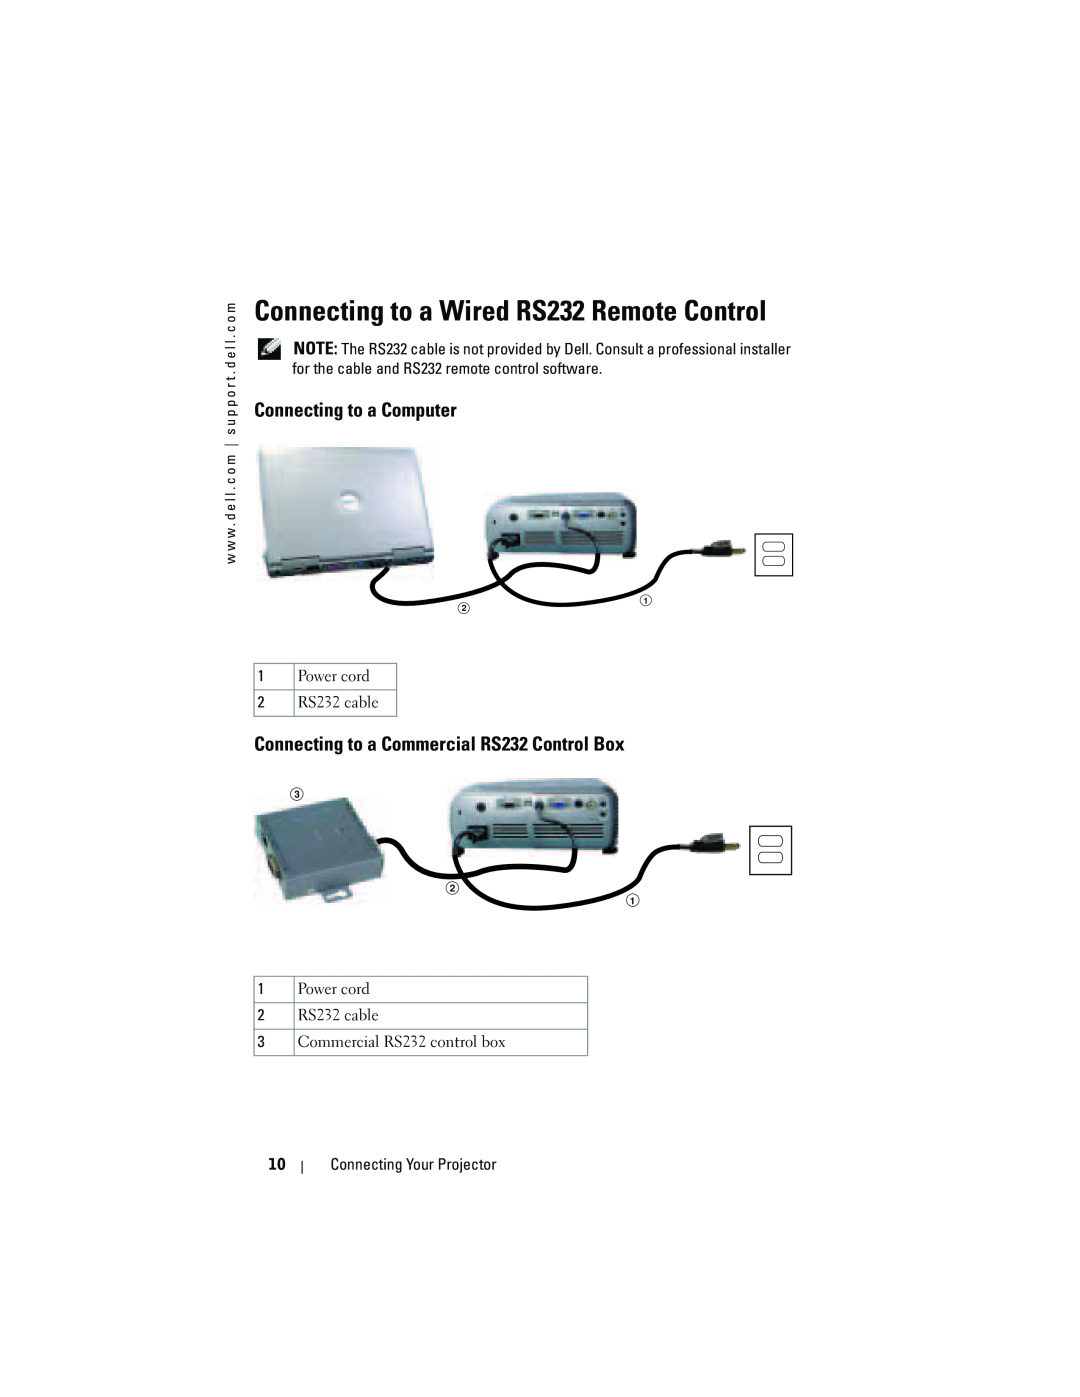 Dell 1200MP owner manual Connecting to a Wired RS232 Remote Control, Connecting to a Computer, Connecting Your Projector 